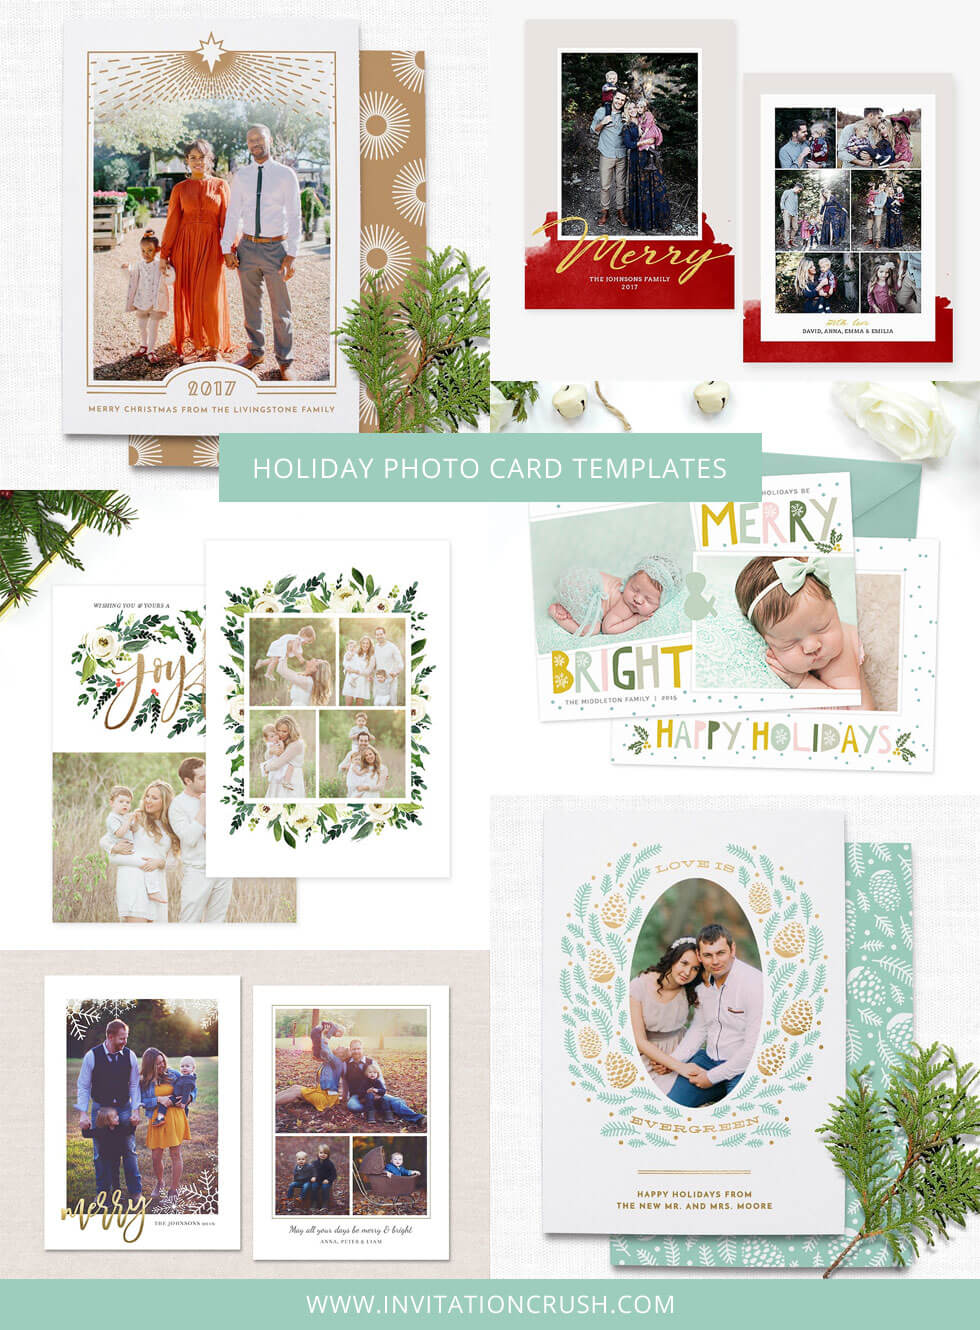 Holiday & Christmas Photo Card Templates For Photographers Within Holiday Card Templates For Photographers